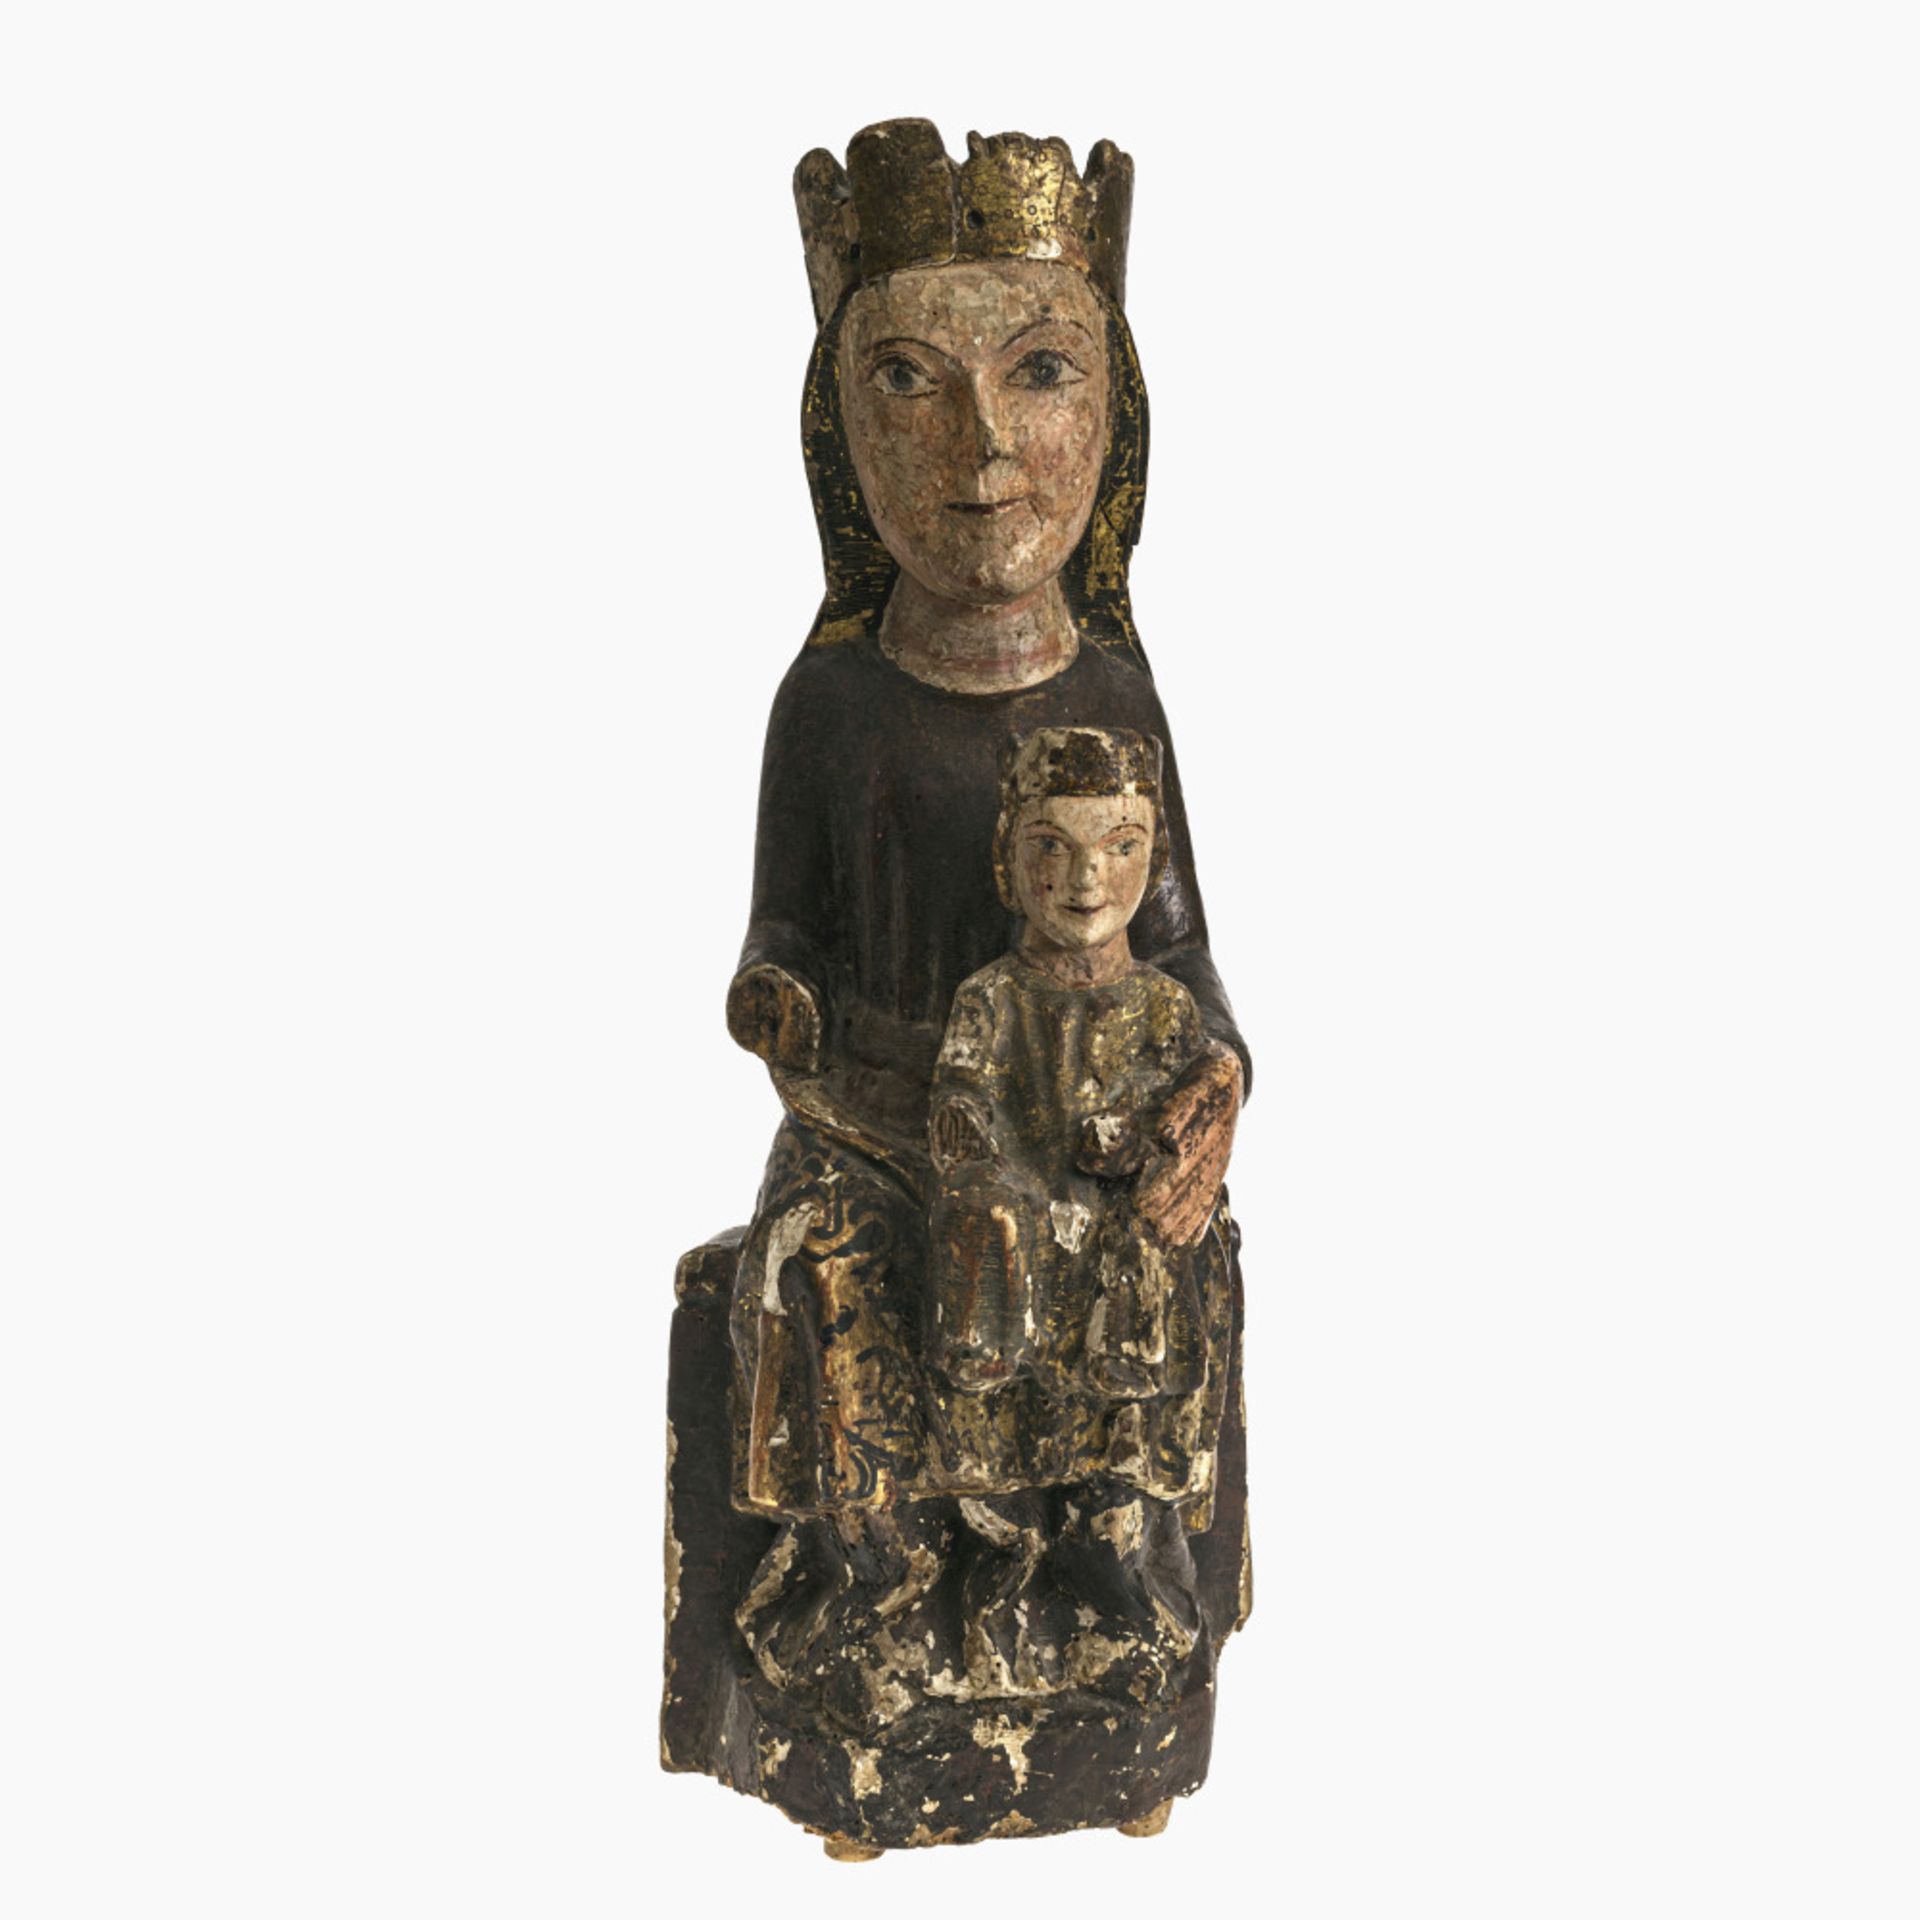 Mary with Child - Spain, probably 14th century